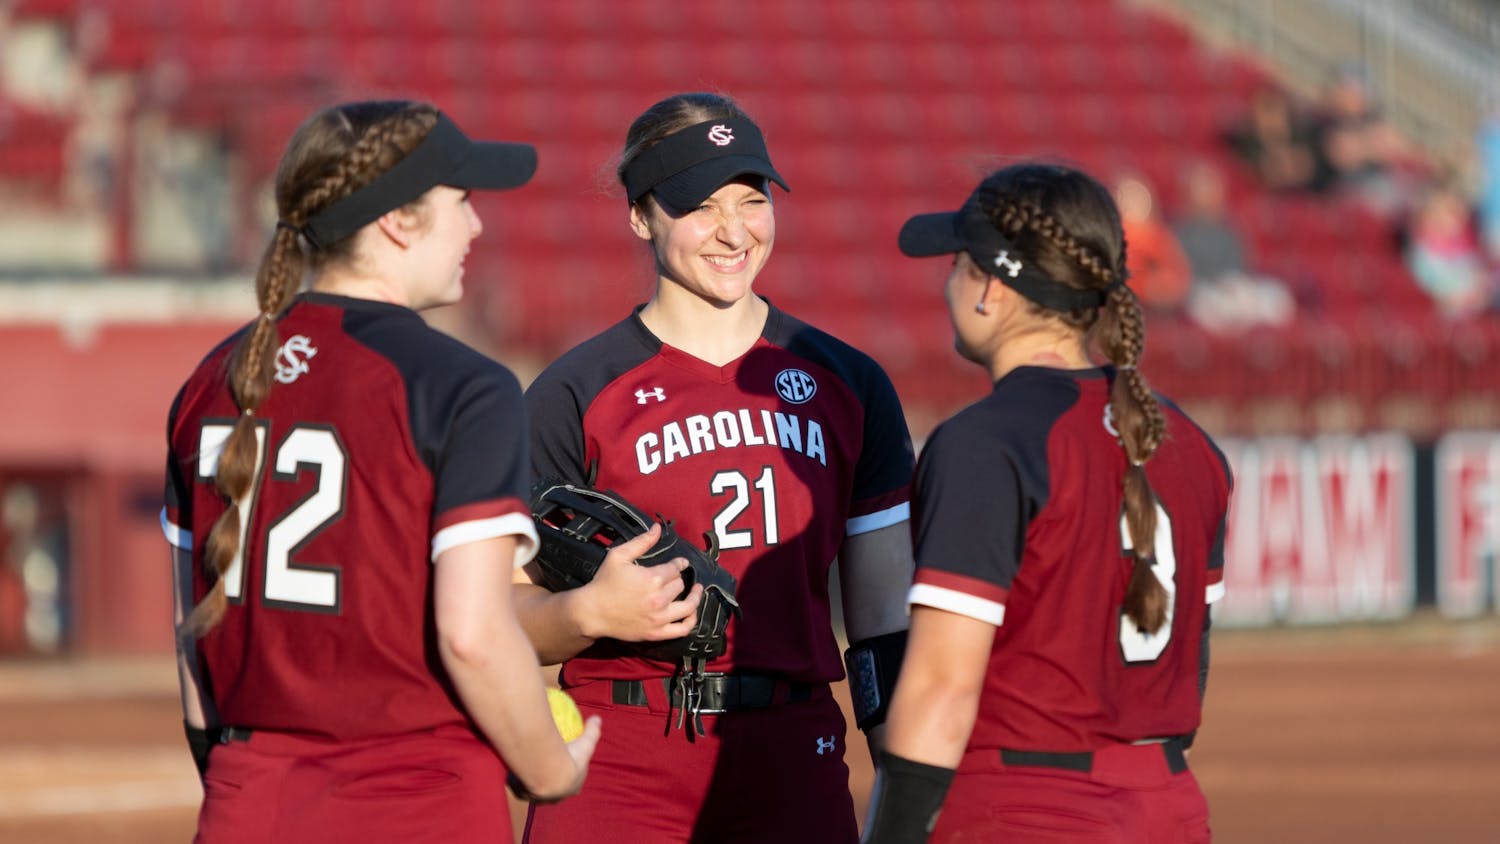 The South Carolina softball team opened up its season in with the Gamecock Invitational on Feb. 11. The three day invitational saw the Gamecocks finish the weekend with a 3-1 record, defeating Virginia, Lipscomb, and George Washington.